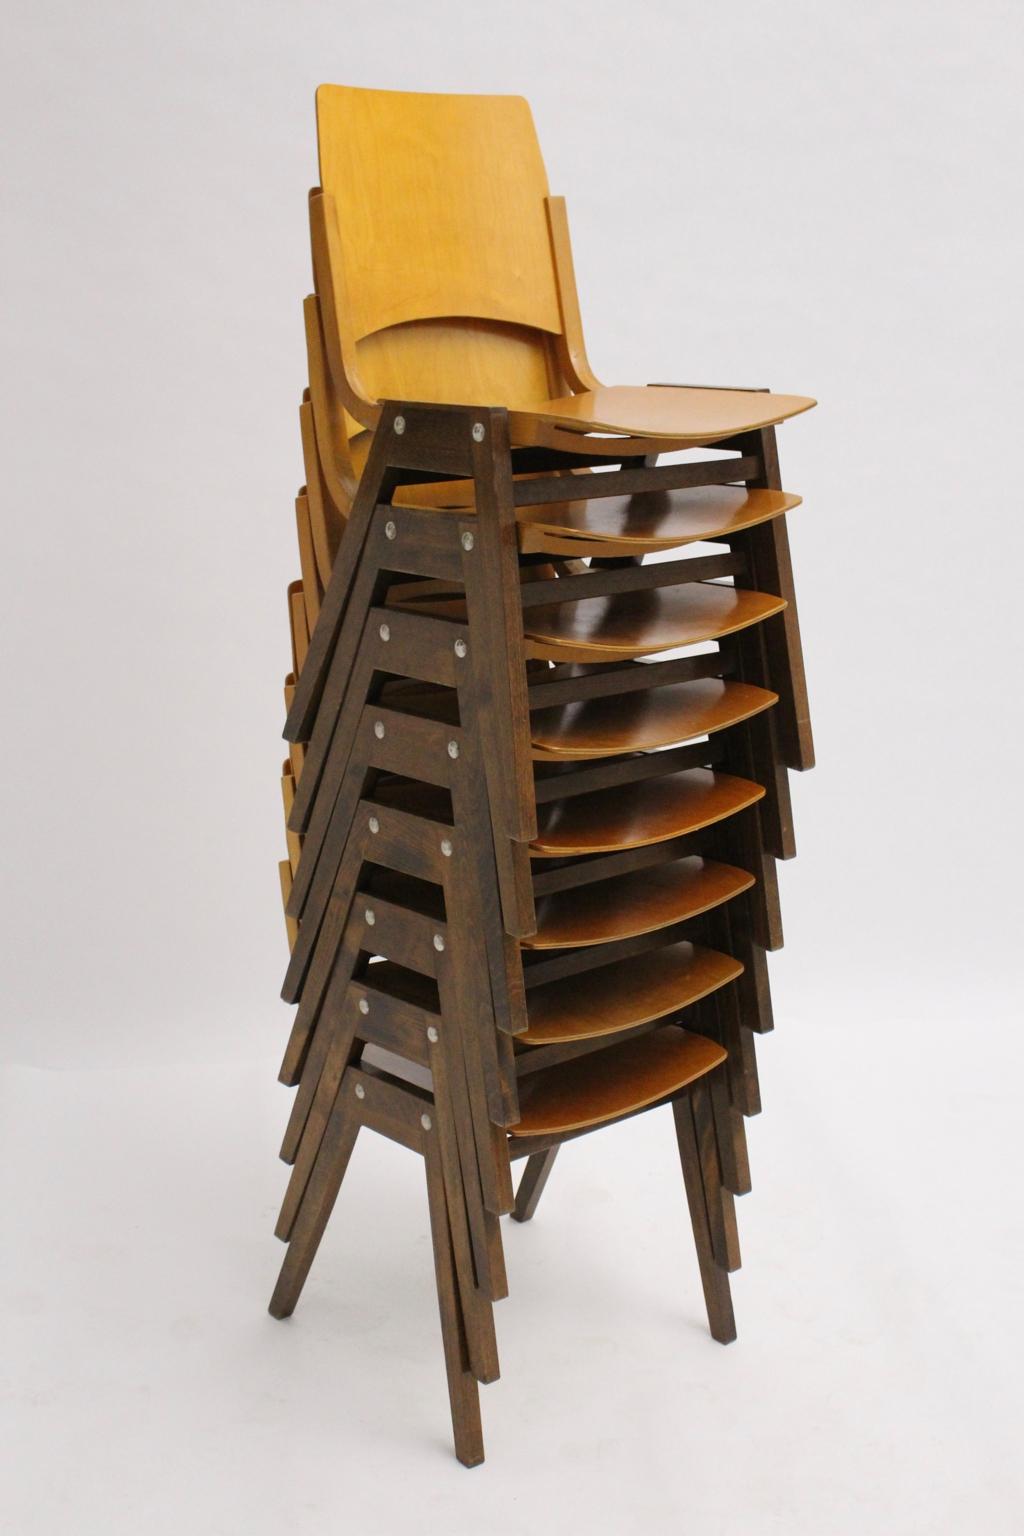 Mid-Century Modern Beech Bicolor Dining Room Chairs Roland Rainer Austria 1952 In Good Condition For Sale In Vienna, AT